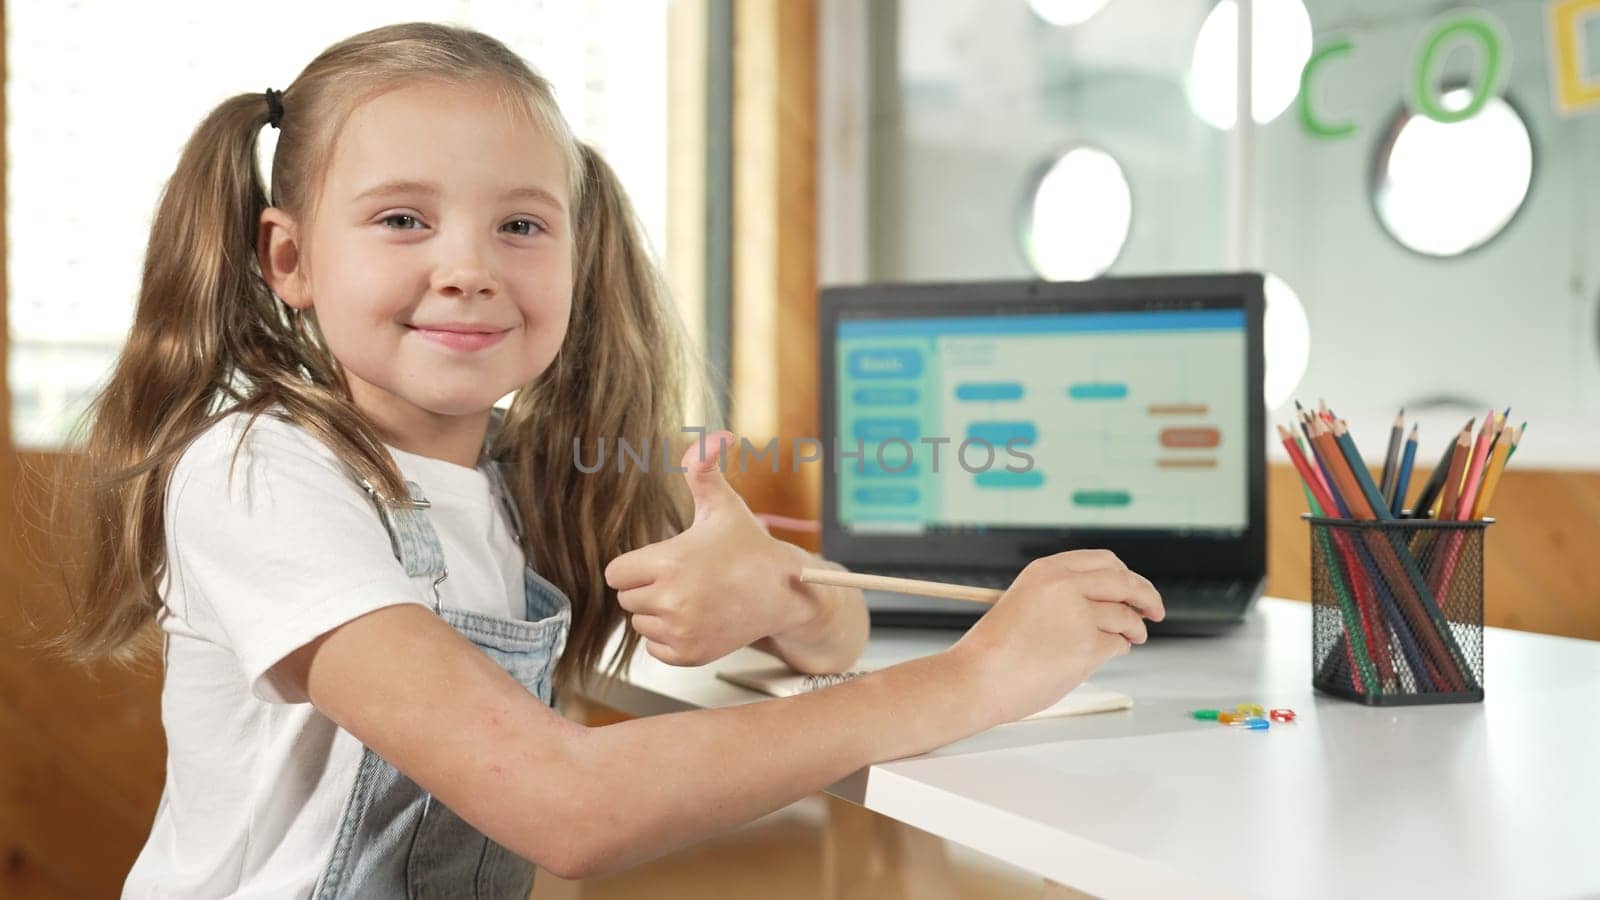 Little pretty caucasian girl smiling to camera while showing a thumb up gesture. Young child wearing headphone and casual dress while laptop display coding system or programing prompt. Erudition.